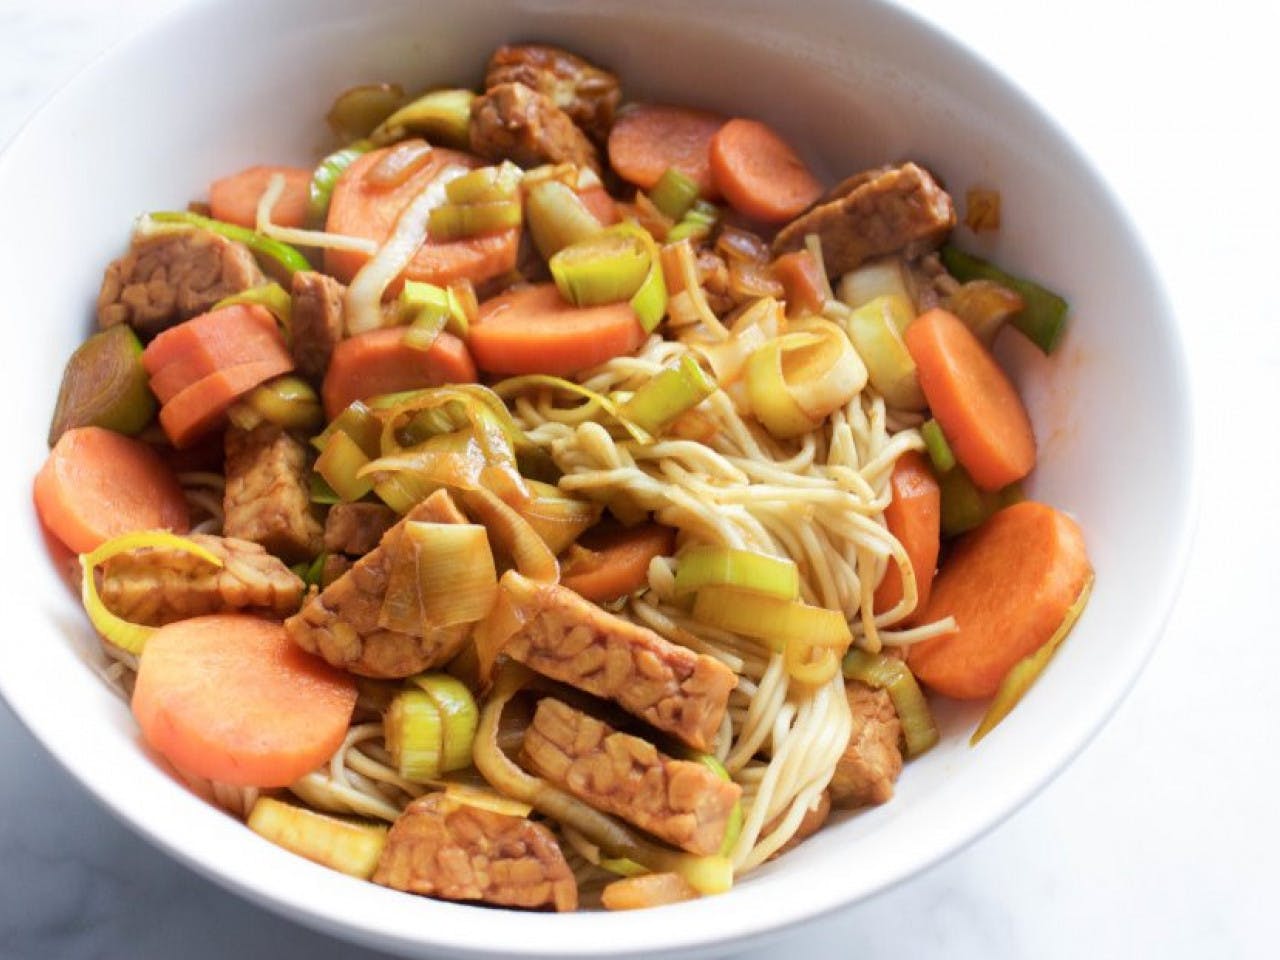 Vegan noodles with vegetables and tempeh